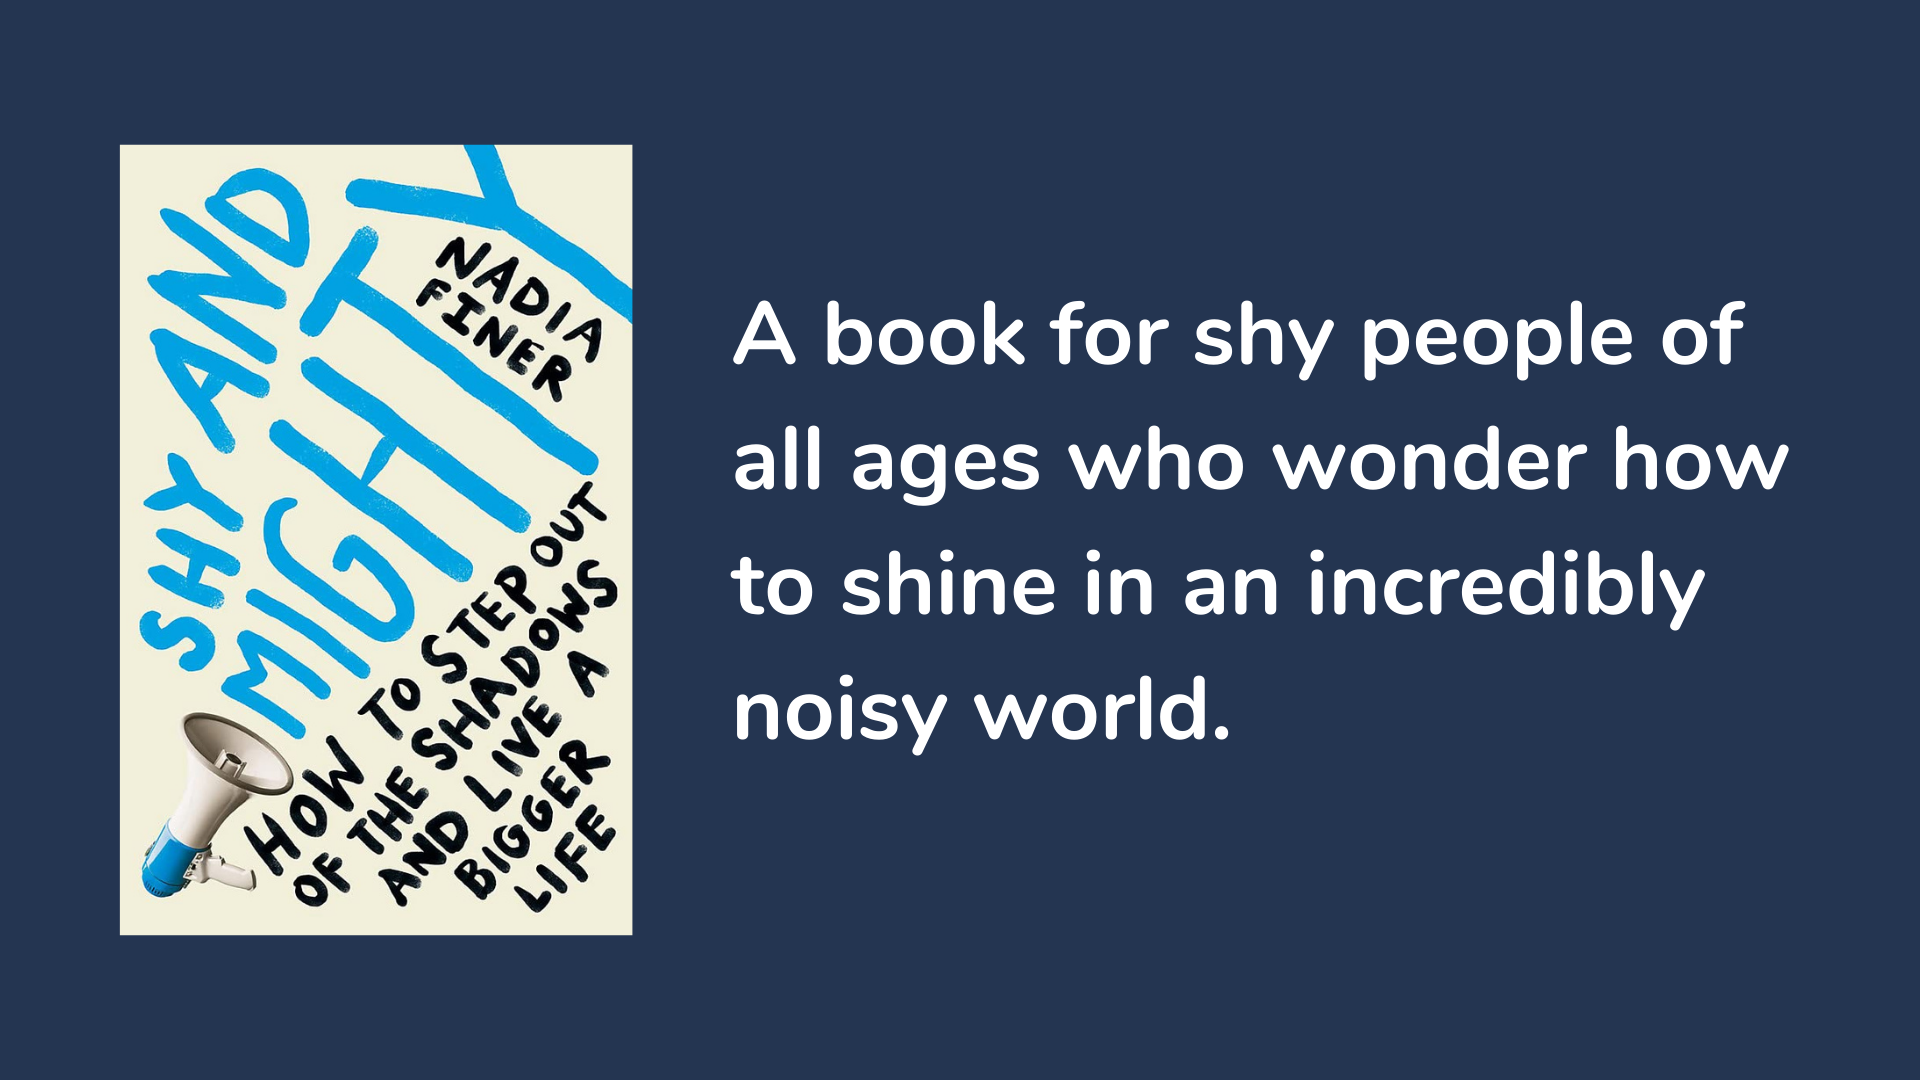 Shy and Mighty: How To Step Out Of The Shadows And Live A Bigger Life, book cover and description.